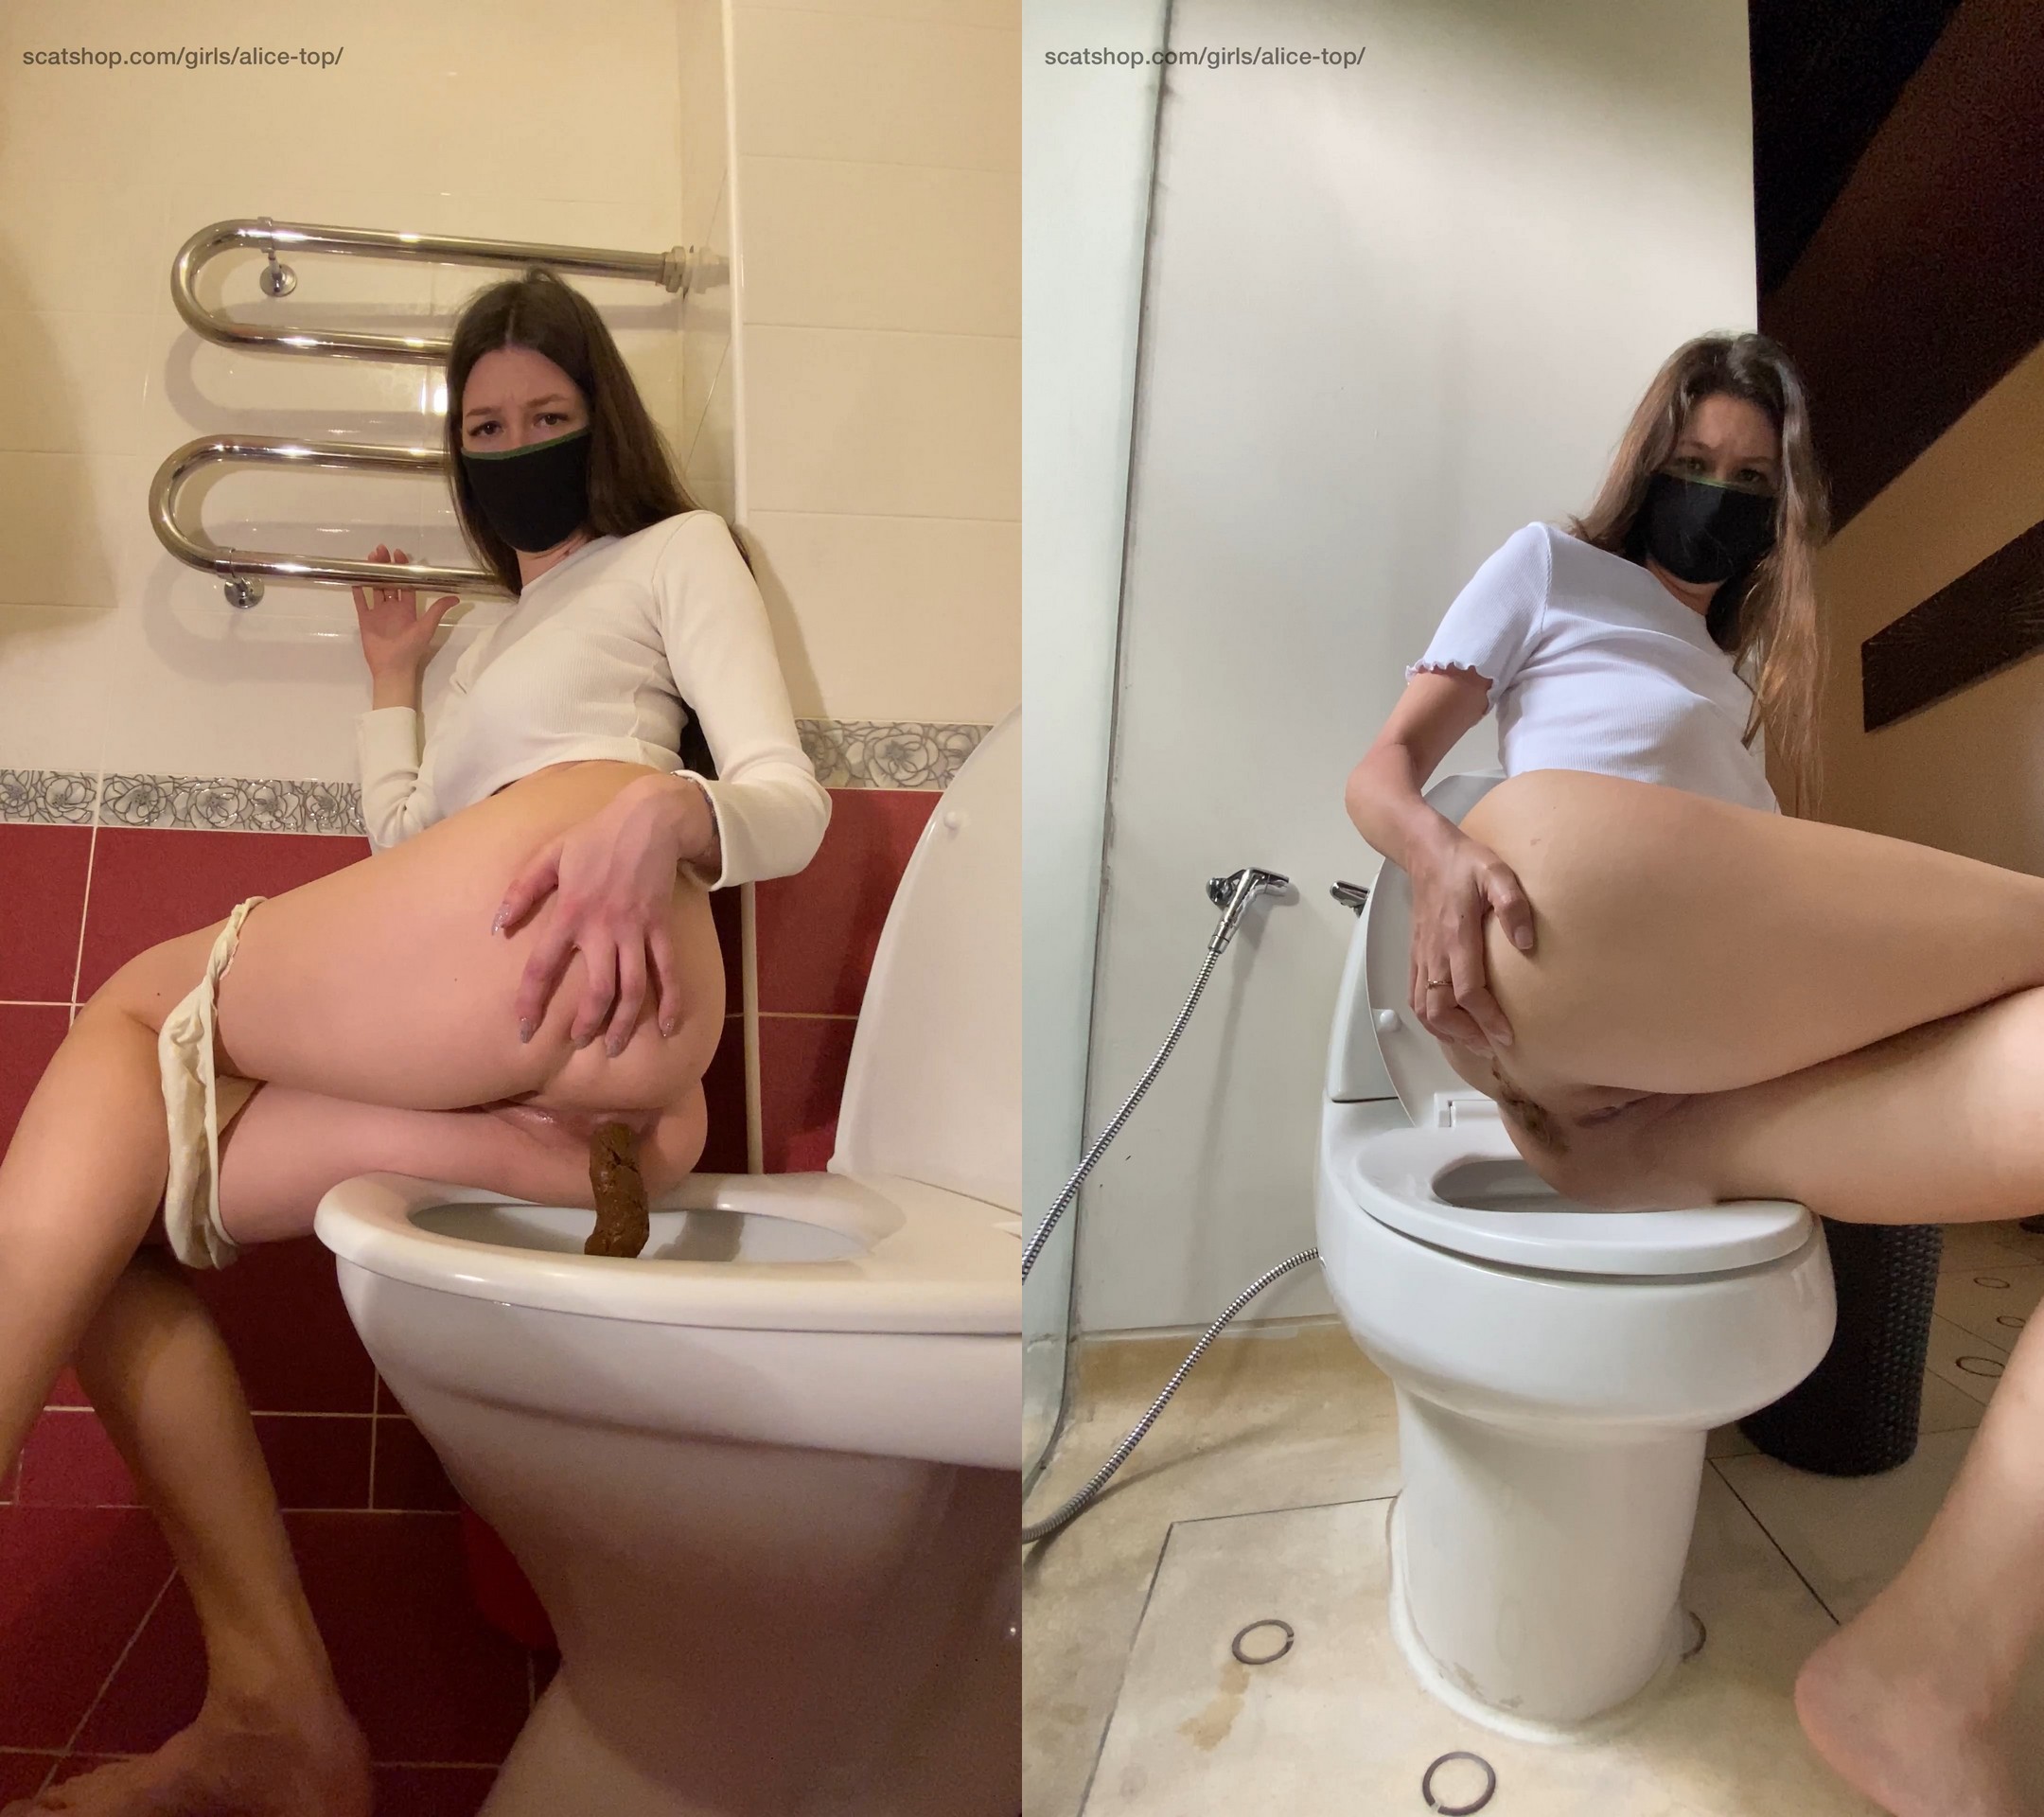 Shit in my friend’s toilet and hotel with Markovna | May 14, 2022 ($9.99 ScatShop)